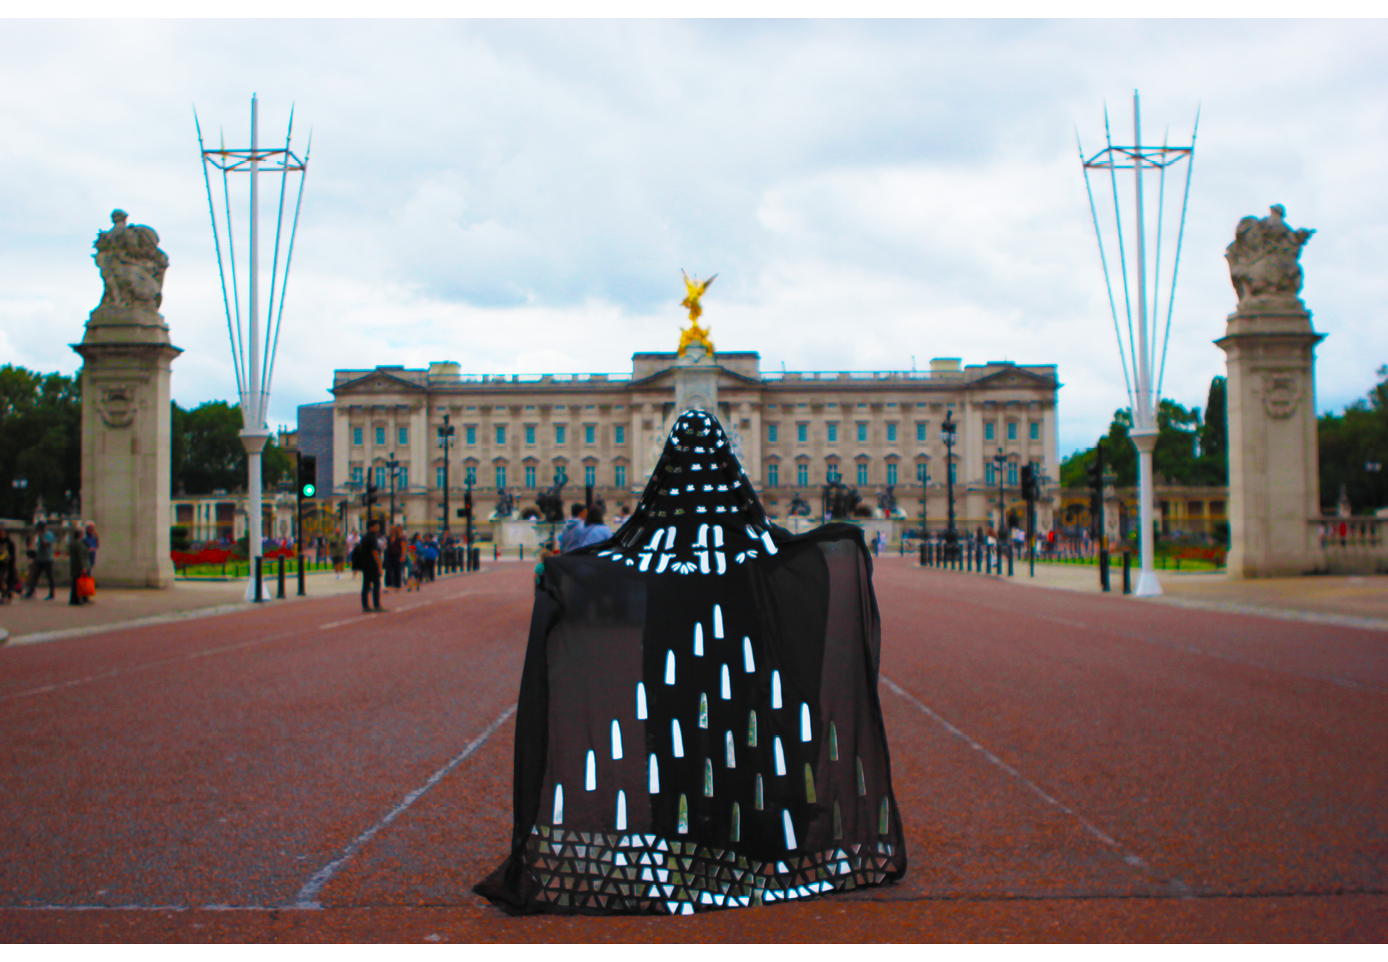 Image of a person standing in the middle the photograph, on a wide road, wearing a long black garment with mirrored patterns. The background of the image shows the entrance to Buckingham Palace, a large buidling with blue windows and two stone statues on either side.